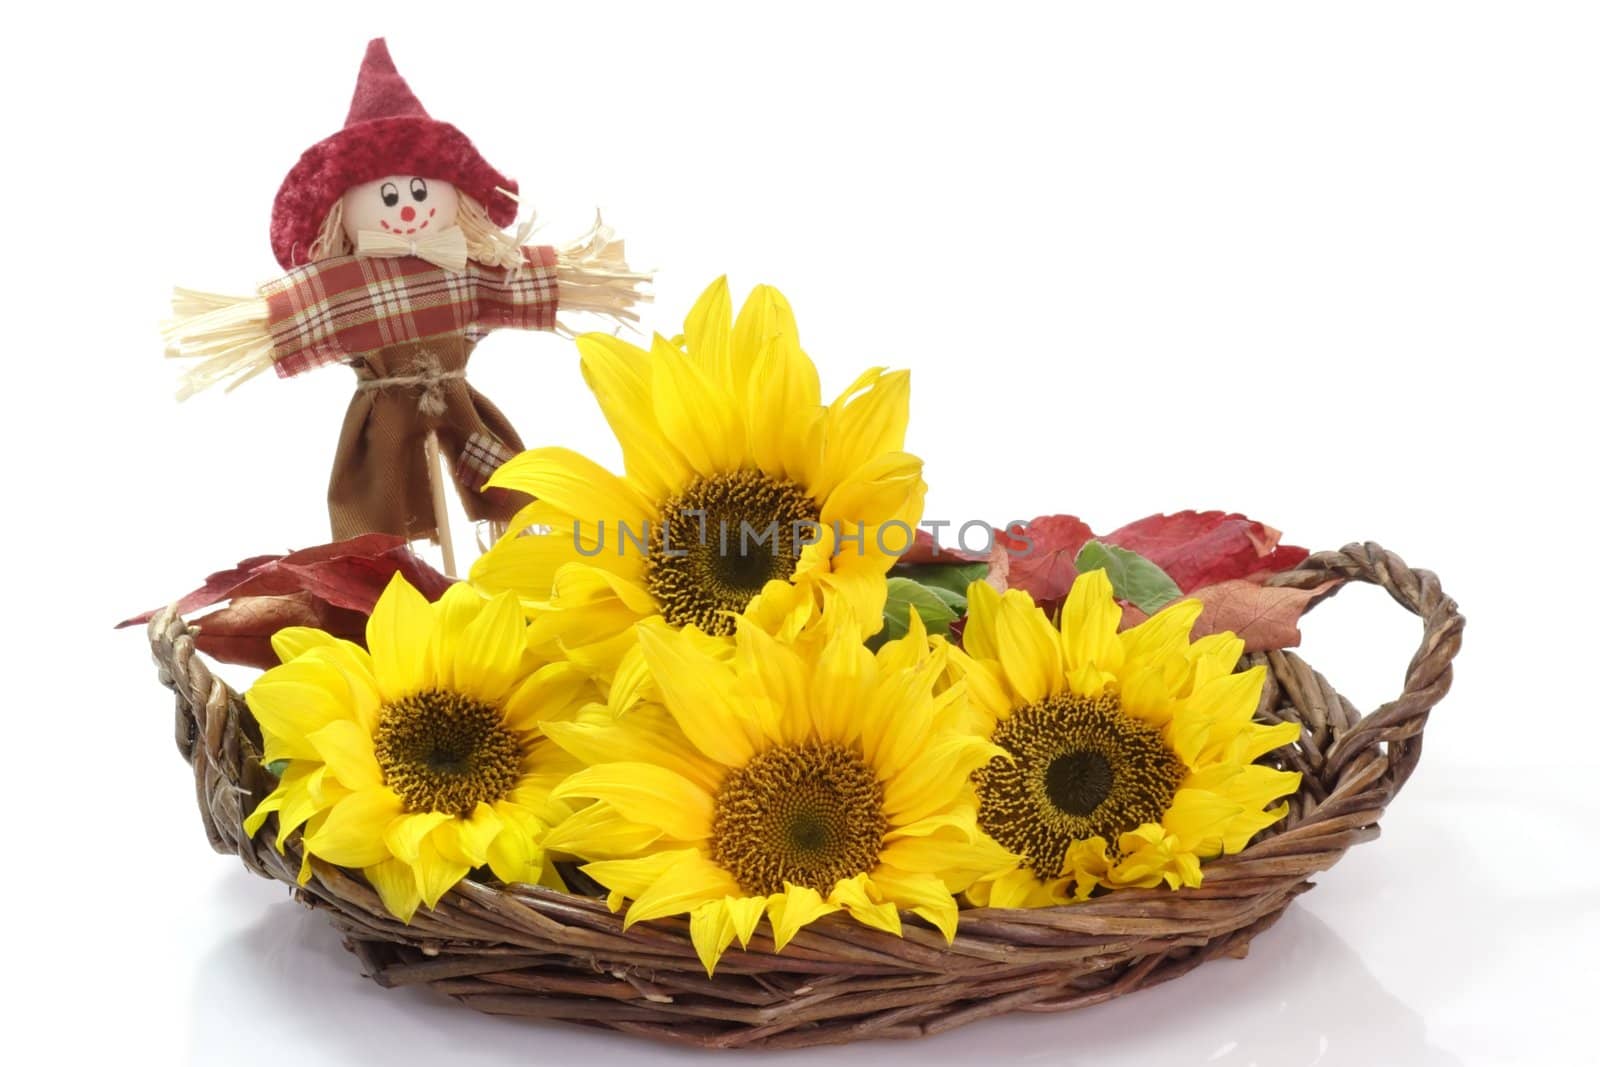 Thanksgiving decoration with sunflowers on white background